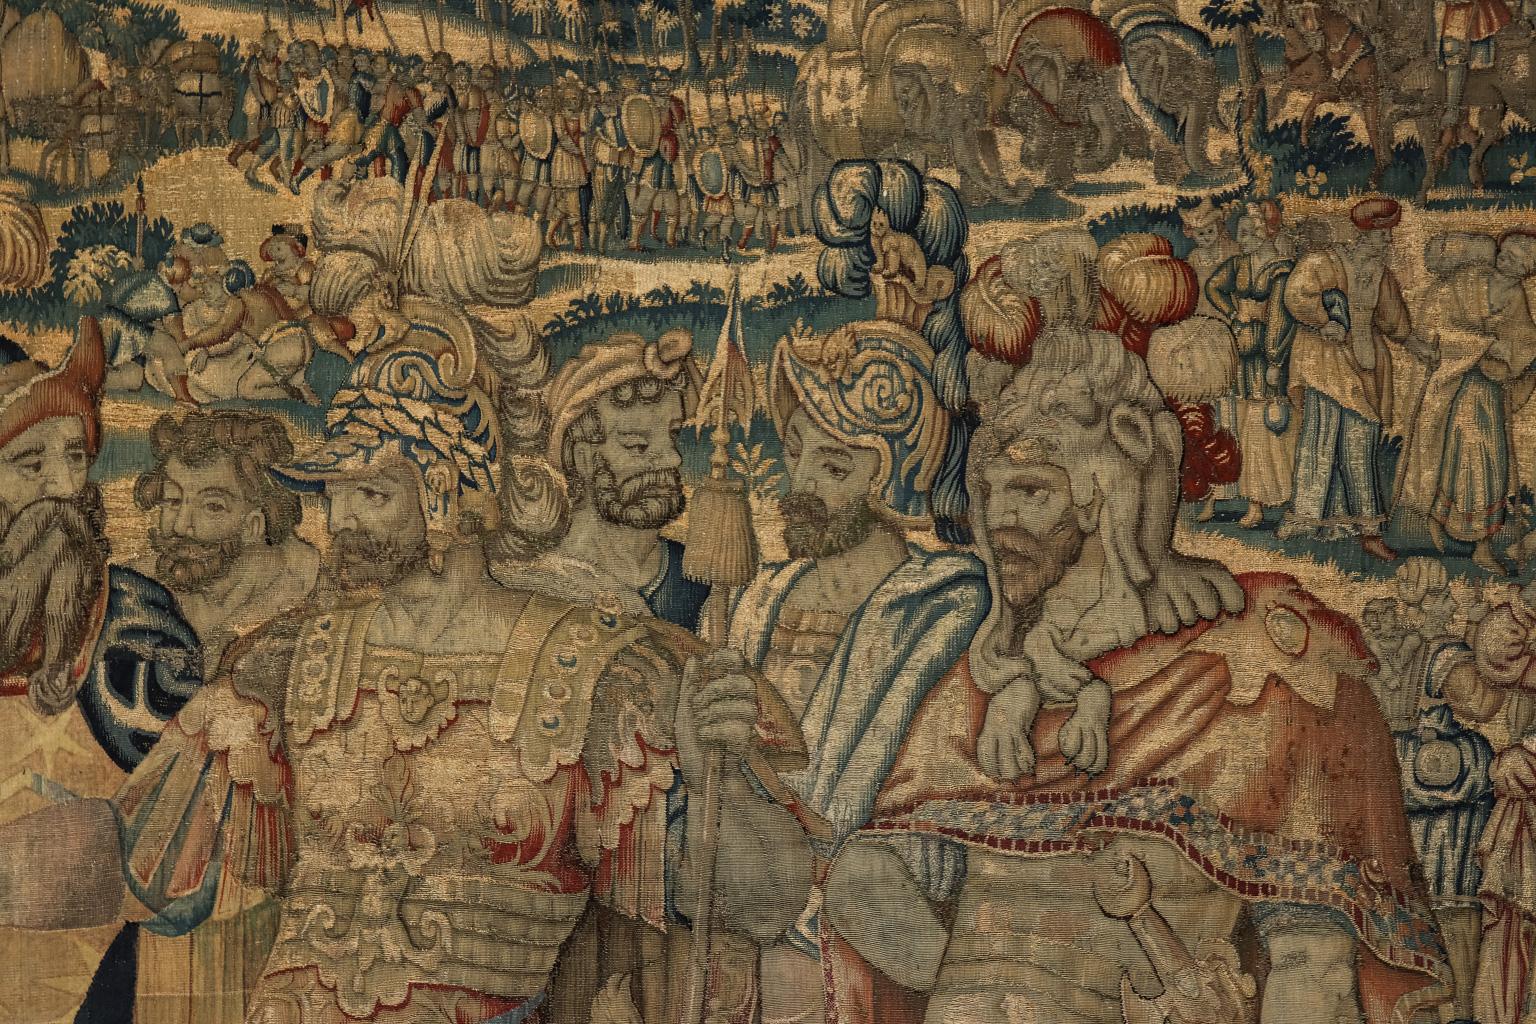 Large pre-19th century historical Flemish tapestry composed of handwoven wool. The piece is heavily detailed with classical figures in the foreground and a landscape scene in the background featuring armies and individuals riding elephants.